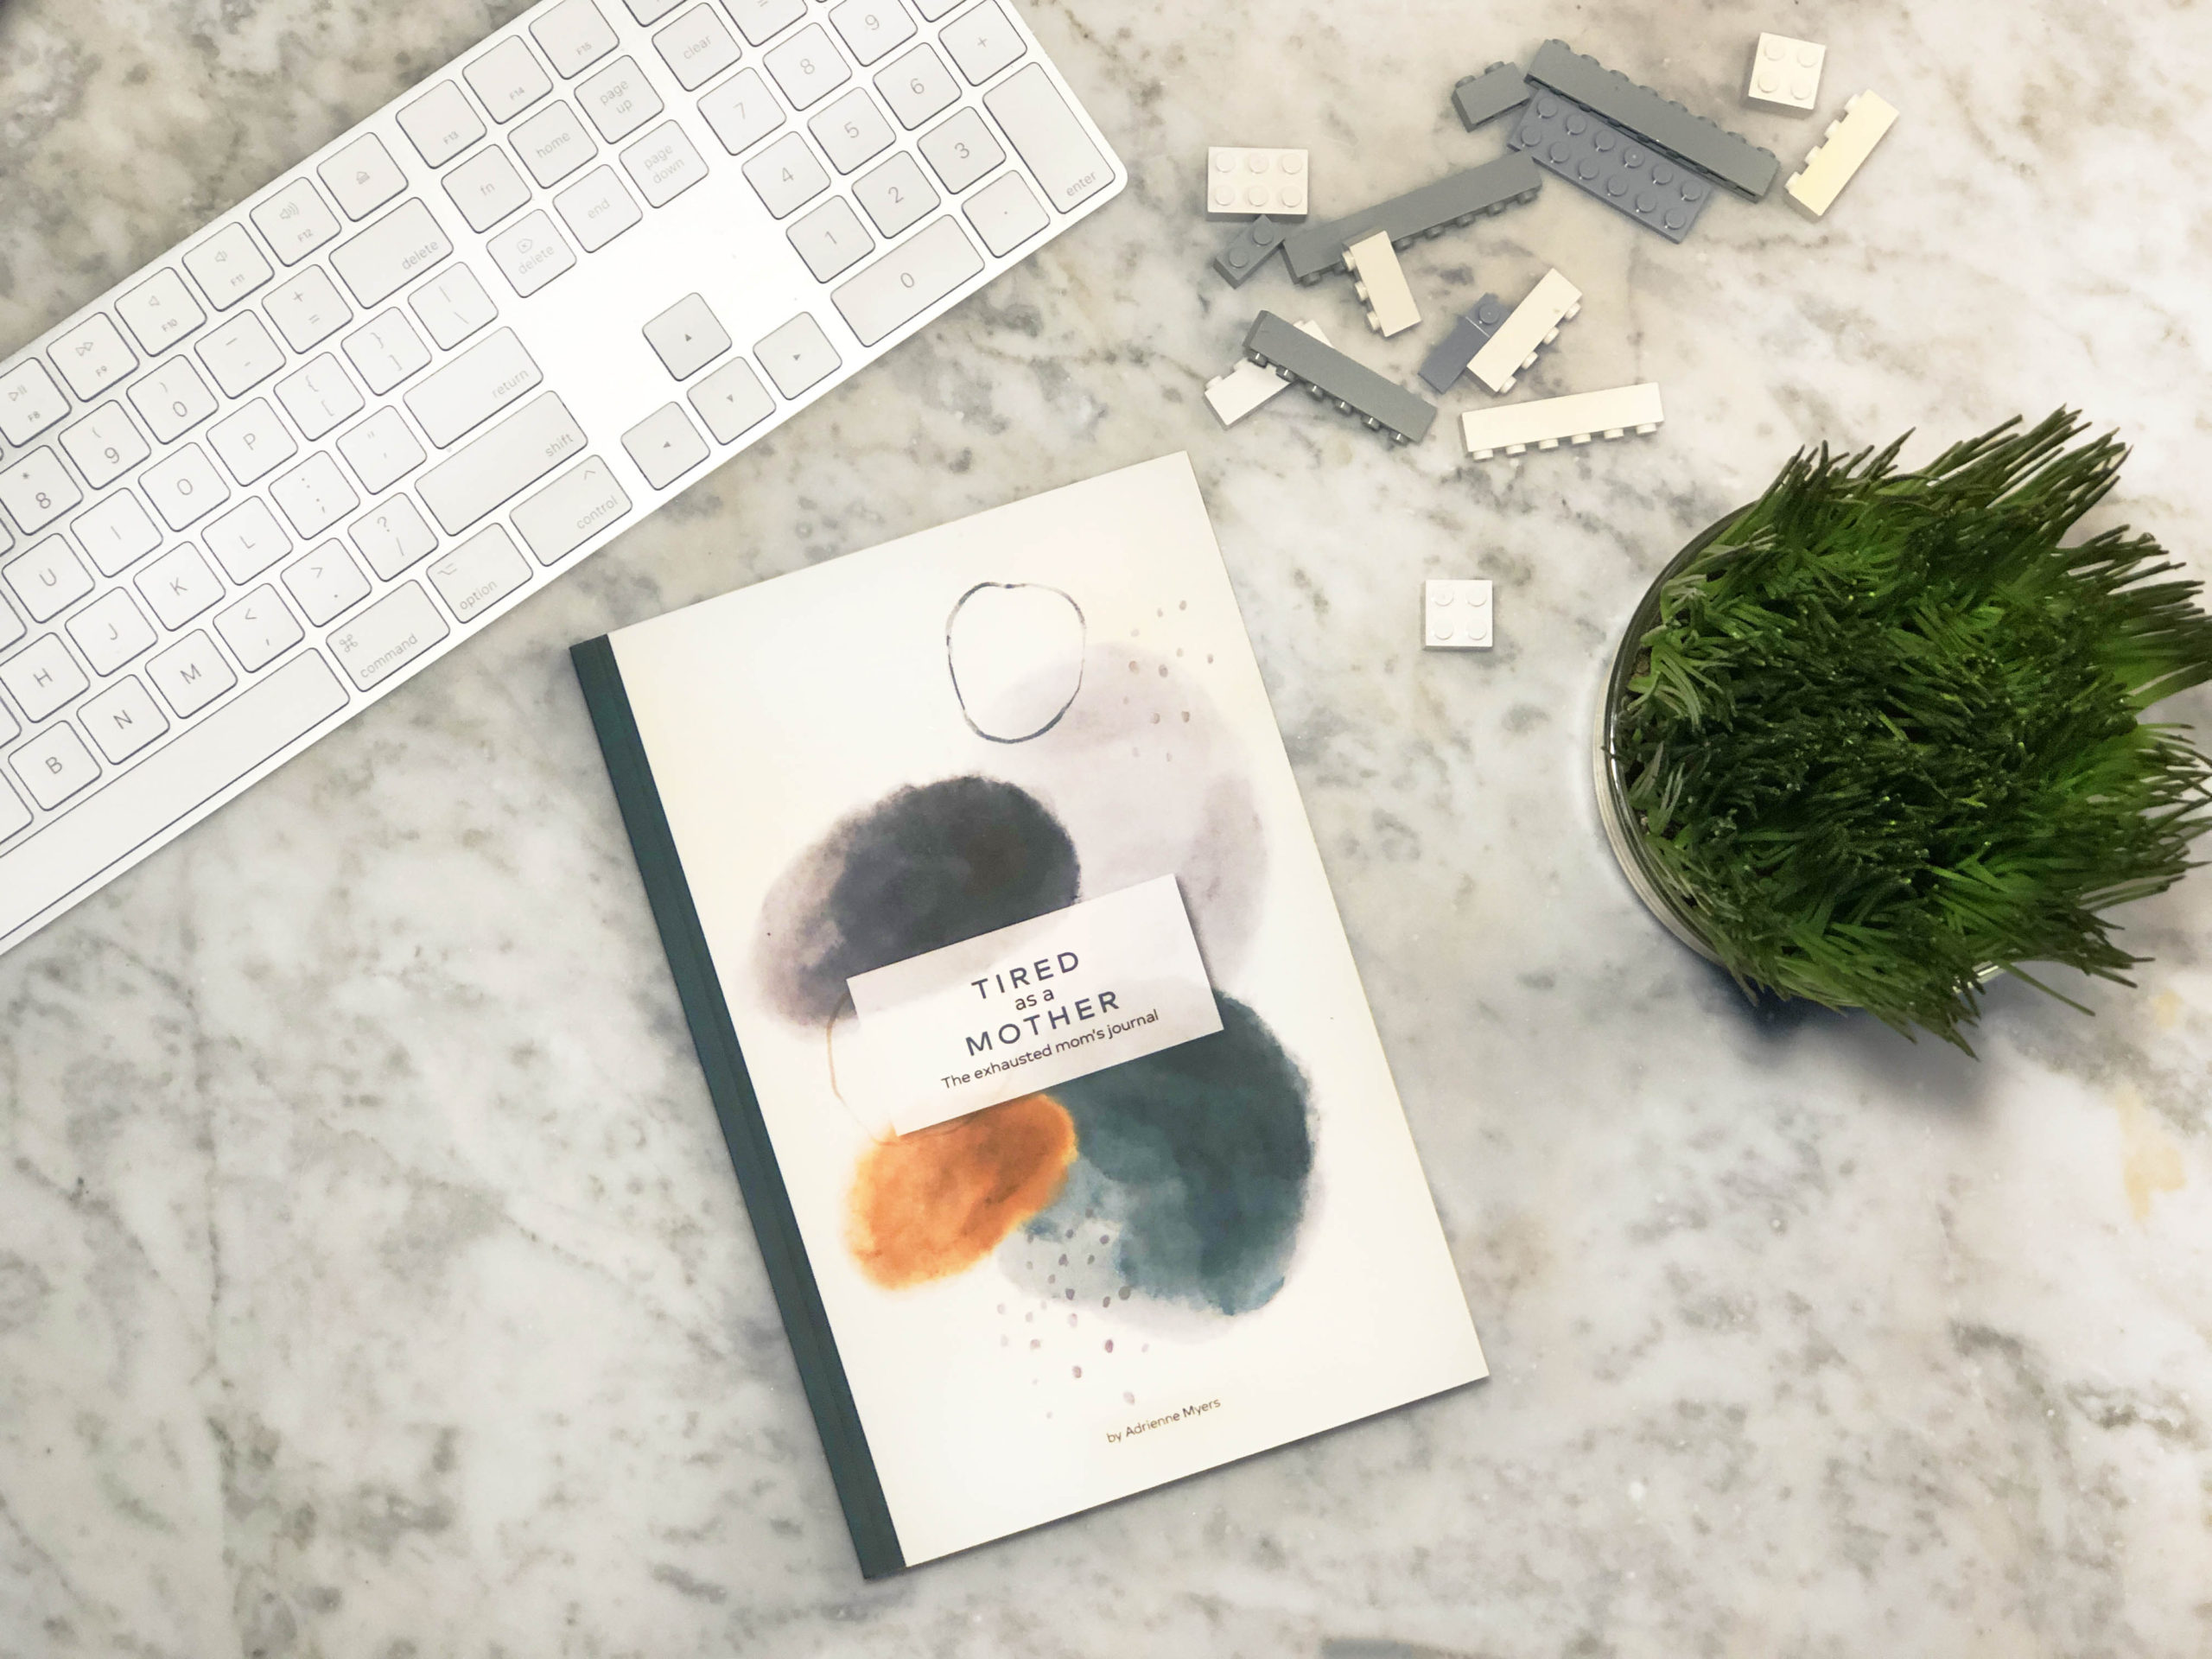 Tired as a mother: the exhausted mom's journal book on a marble tabletop